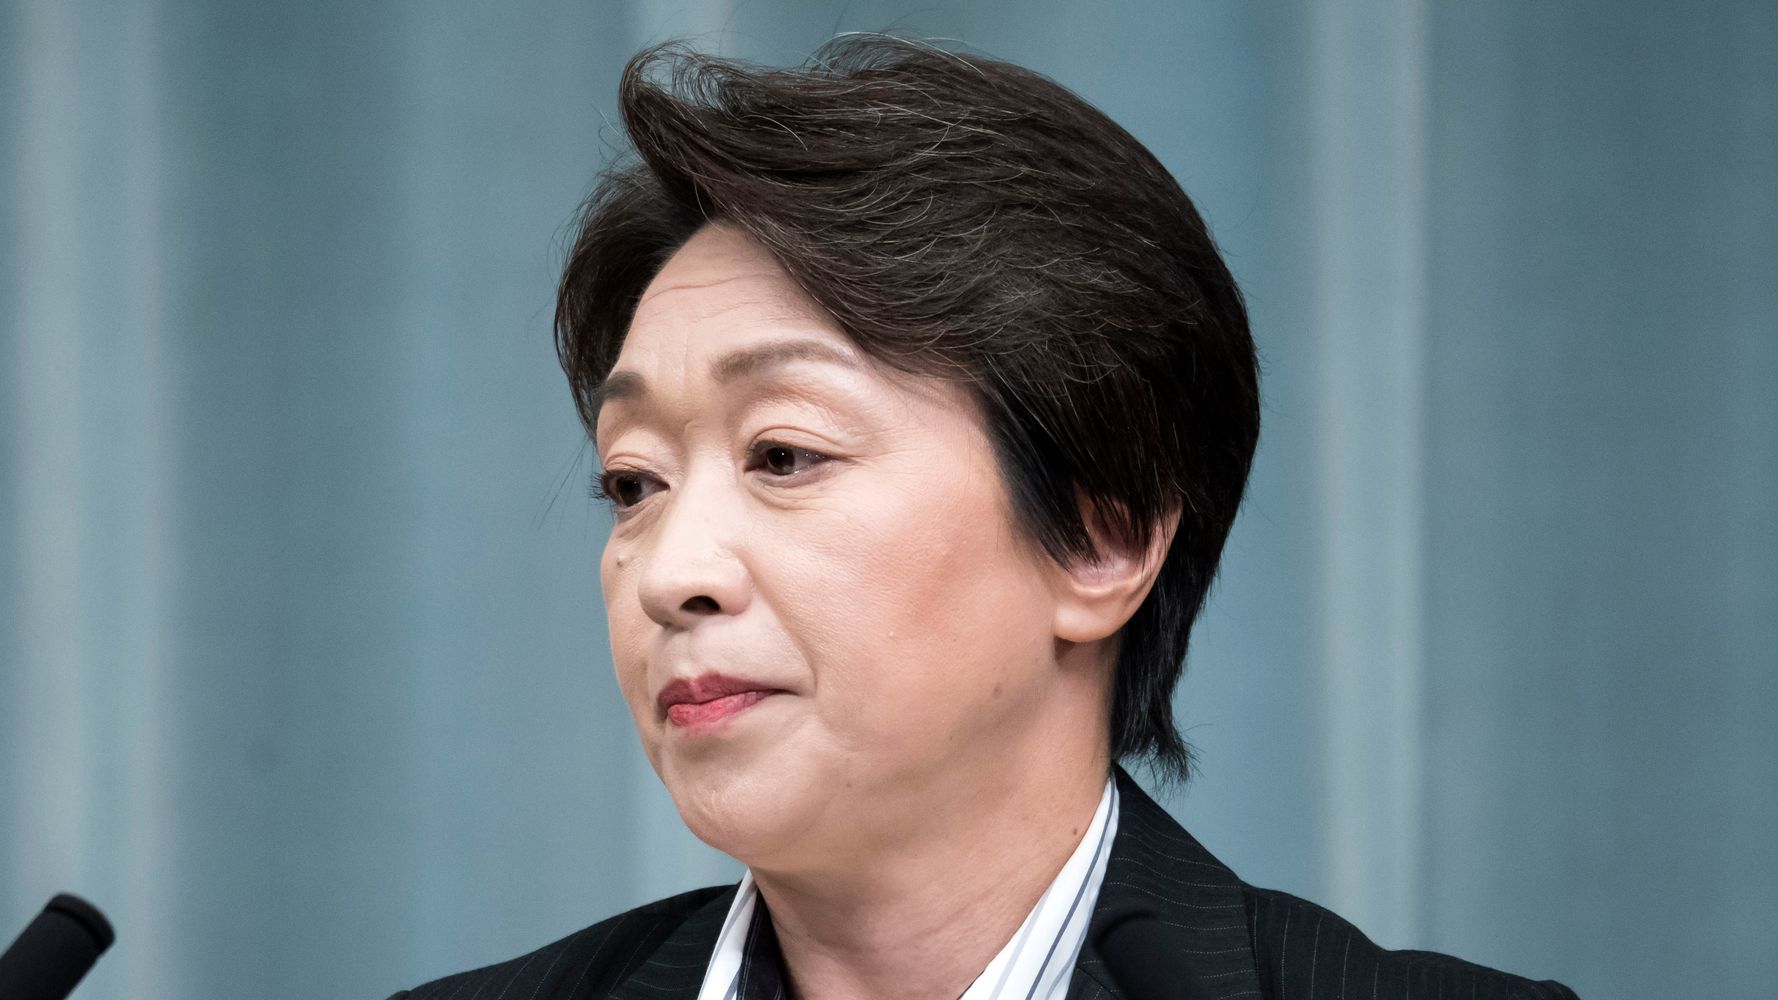 Legendary Olympic athlete takes control of Tokyo Games after sexist reaction